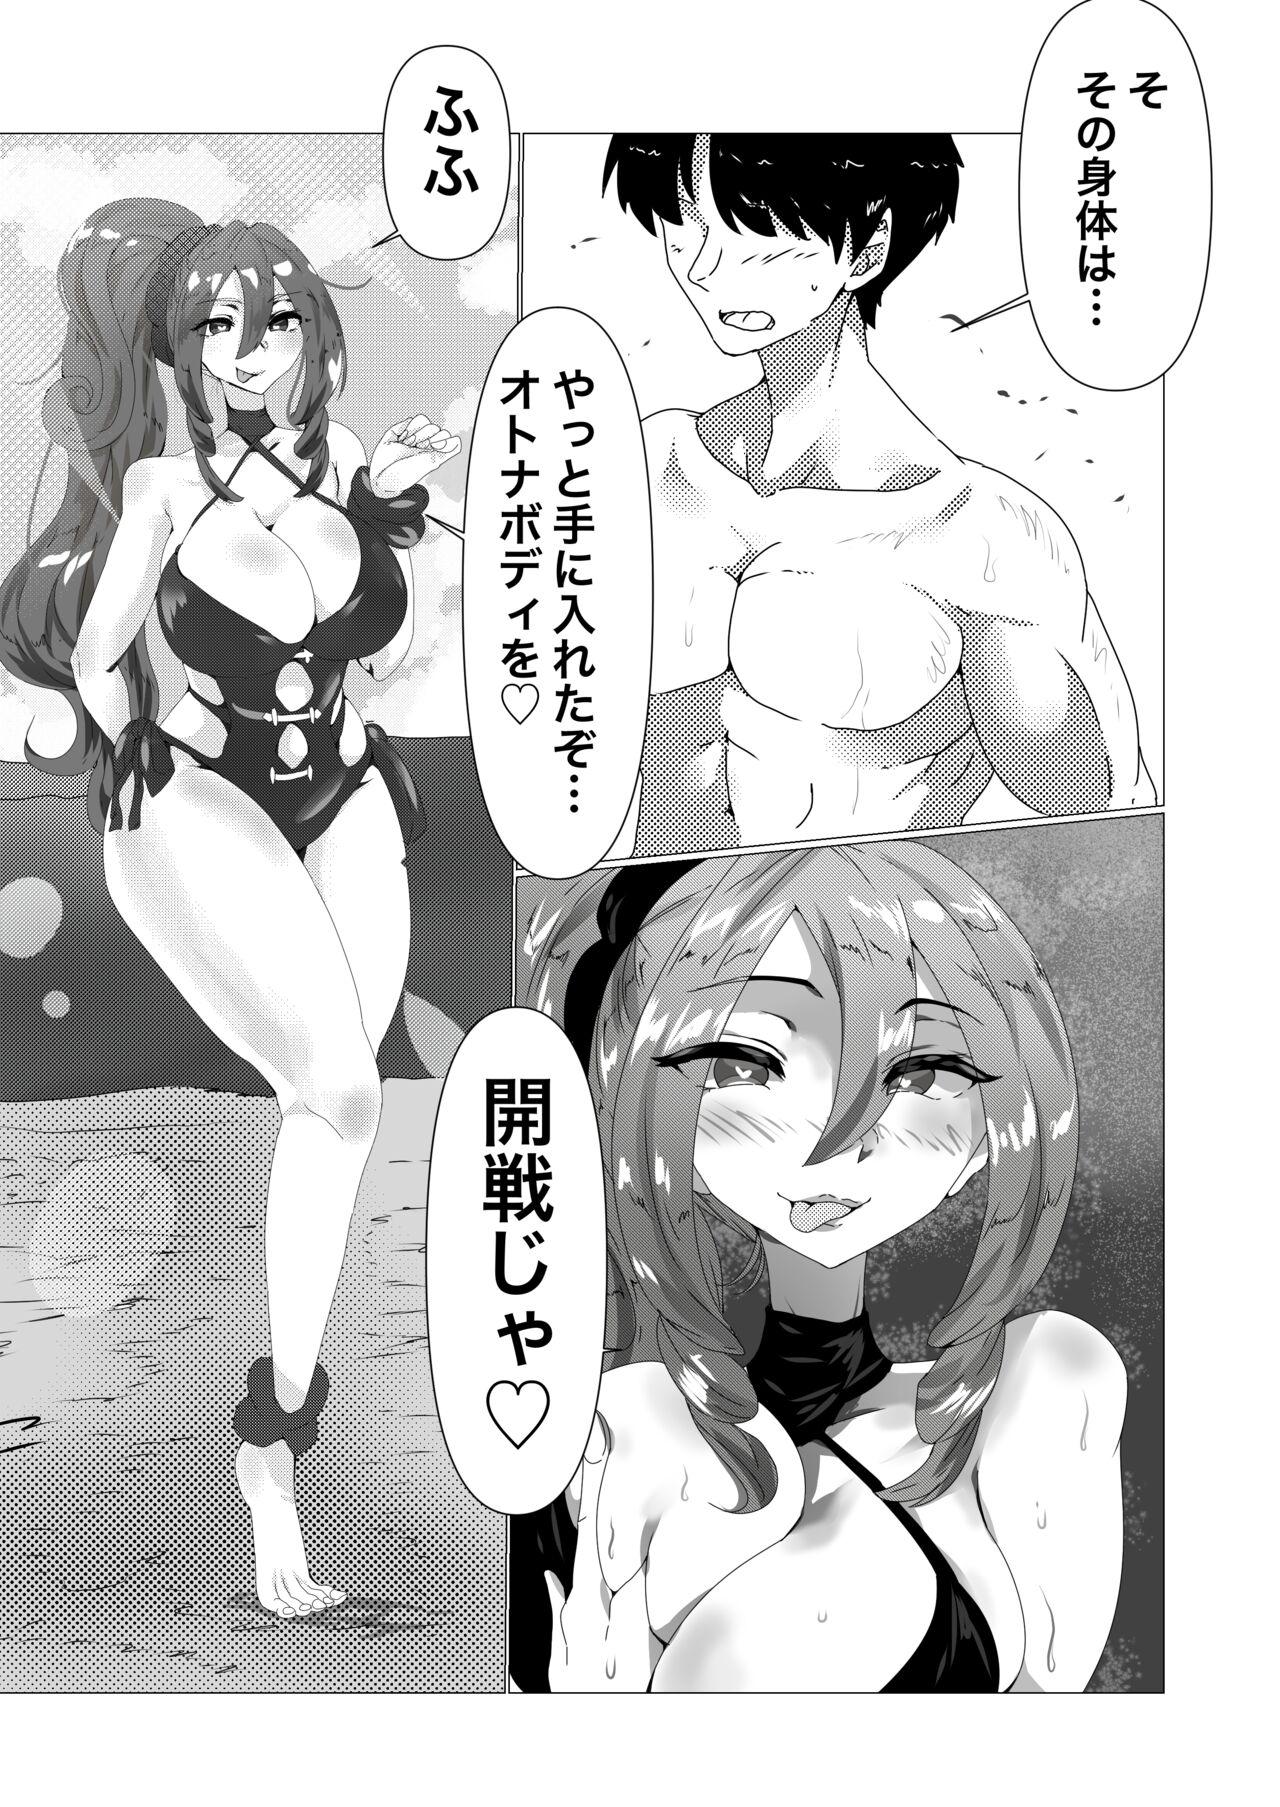 Public Nudity Wu Zetian to Umibe de Otawamure - Fate grand order Hermosa - Page 1